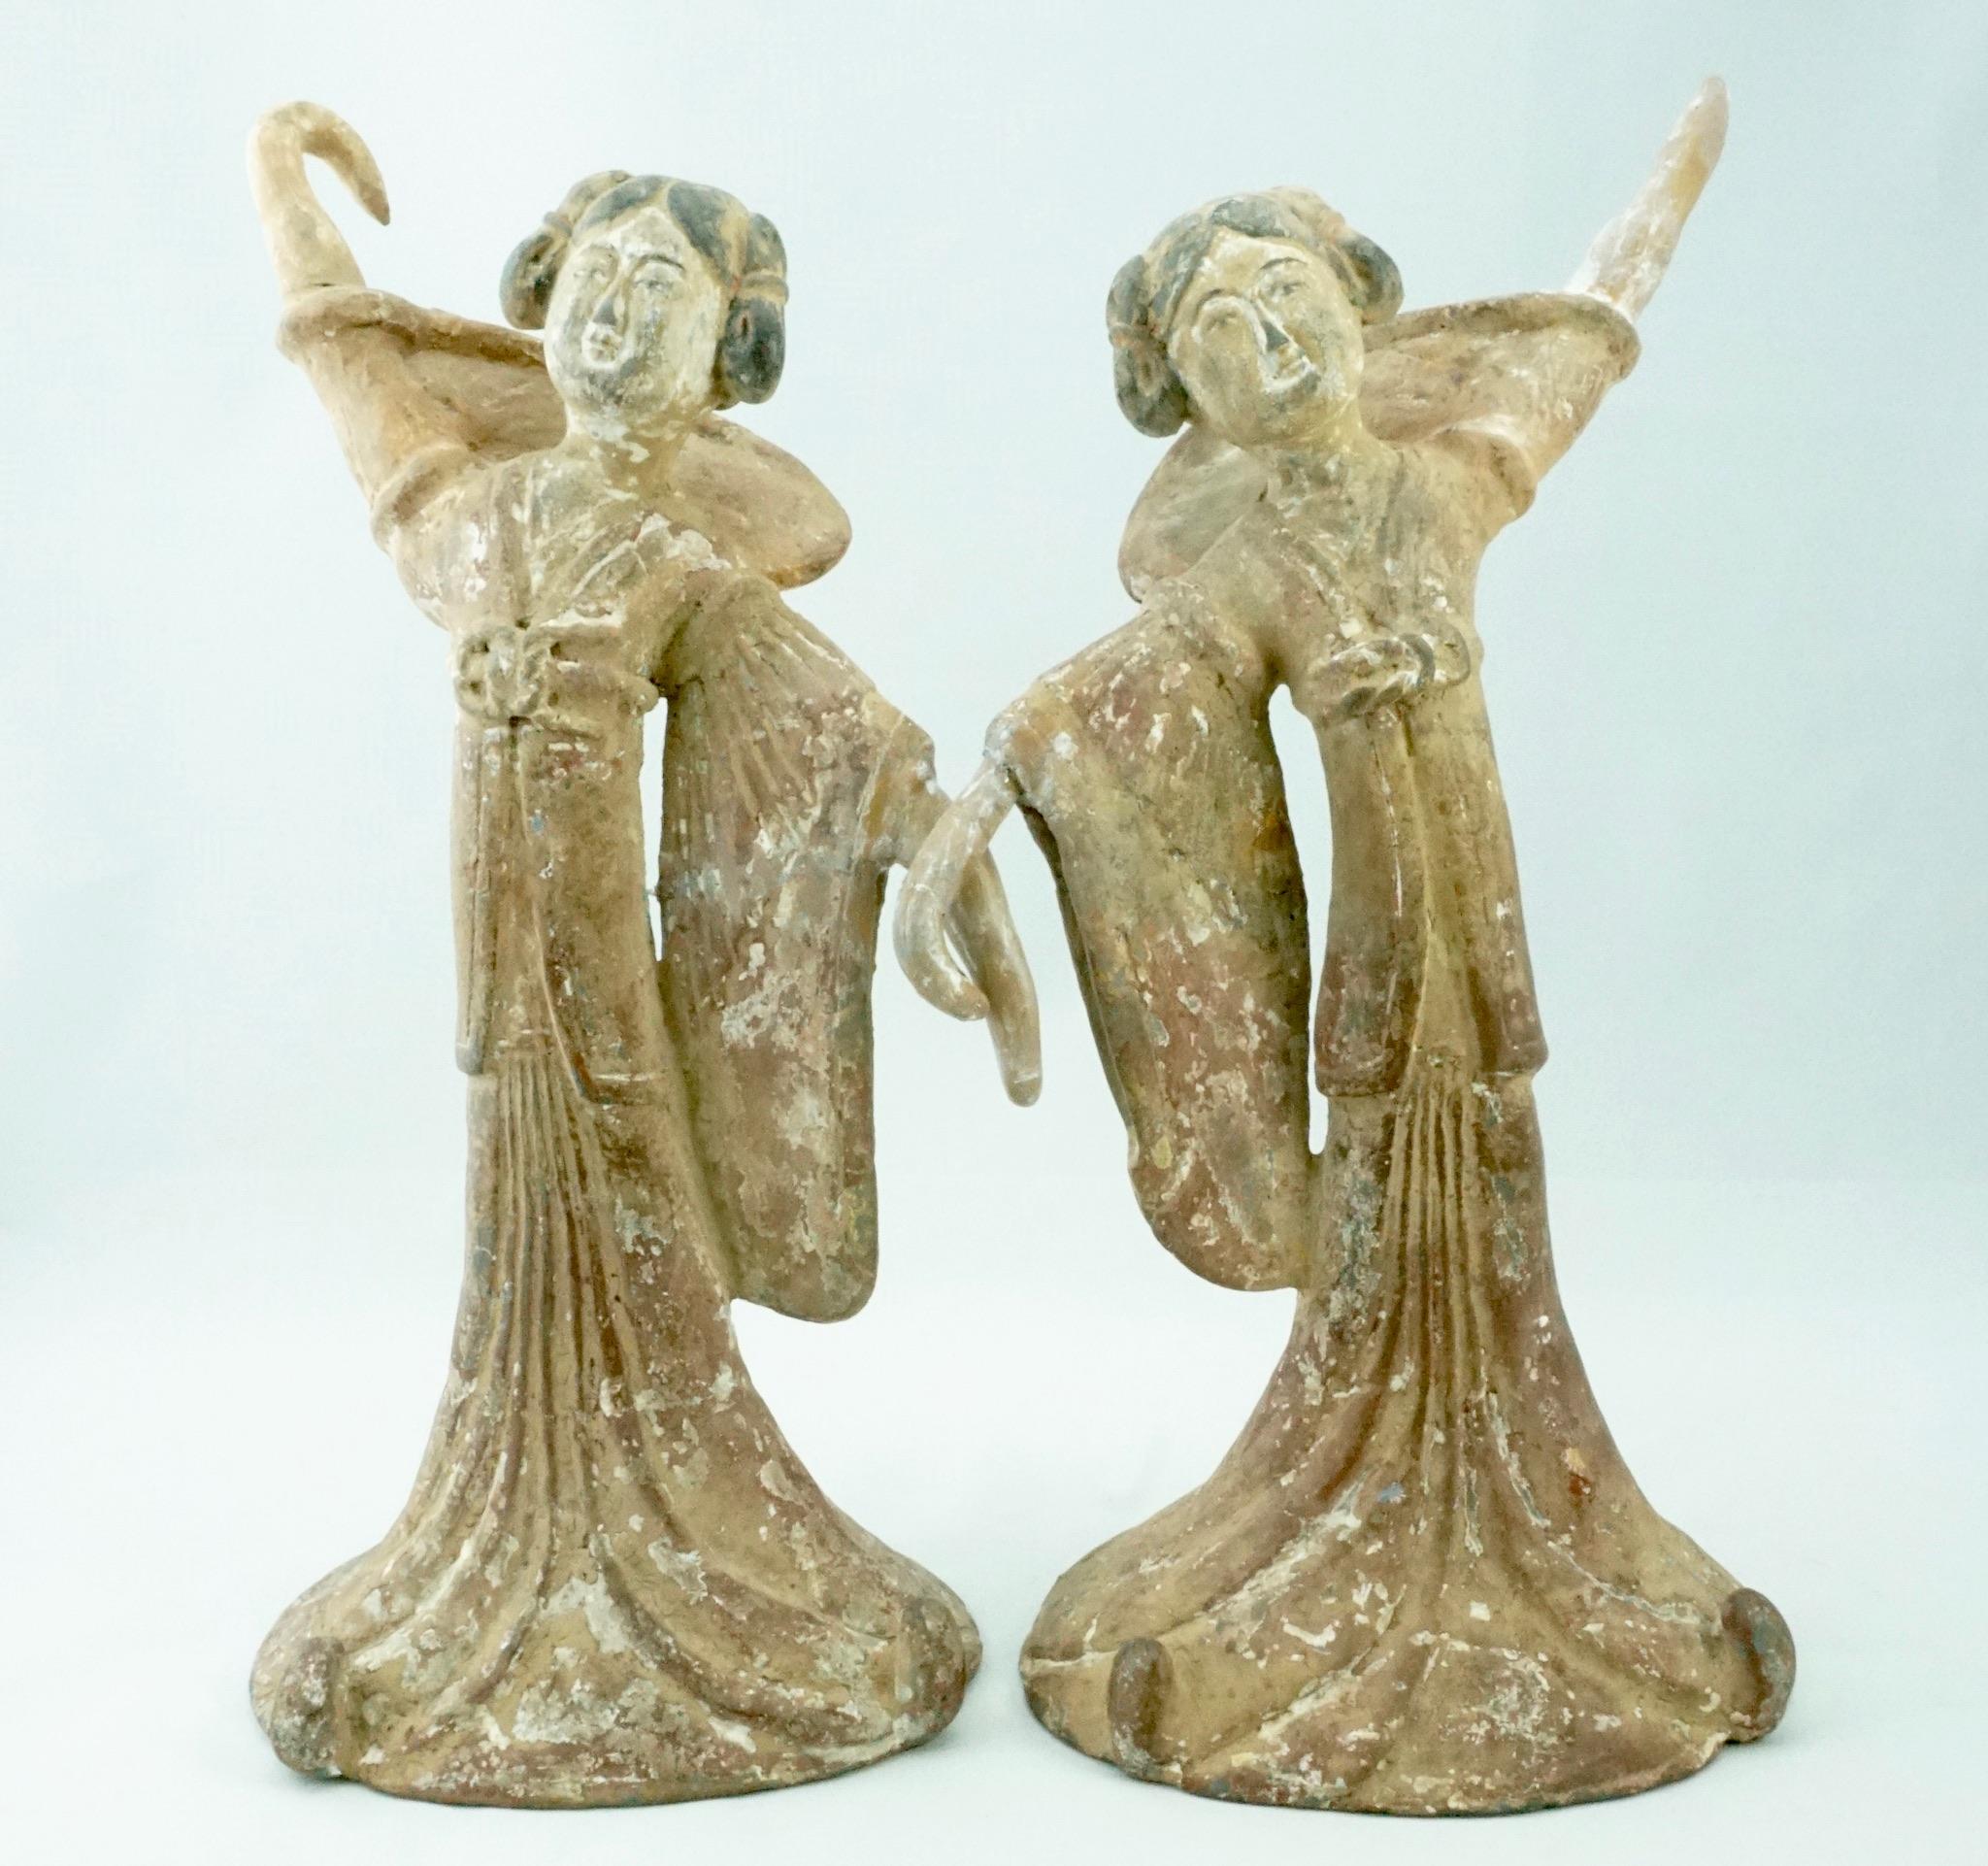 Terracotta Pair Tang Dynasty Dancing Figures, China '618-907AD' For Sale